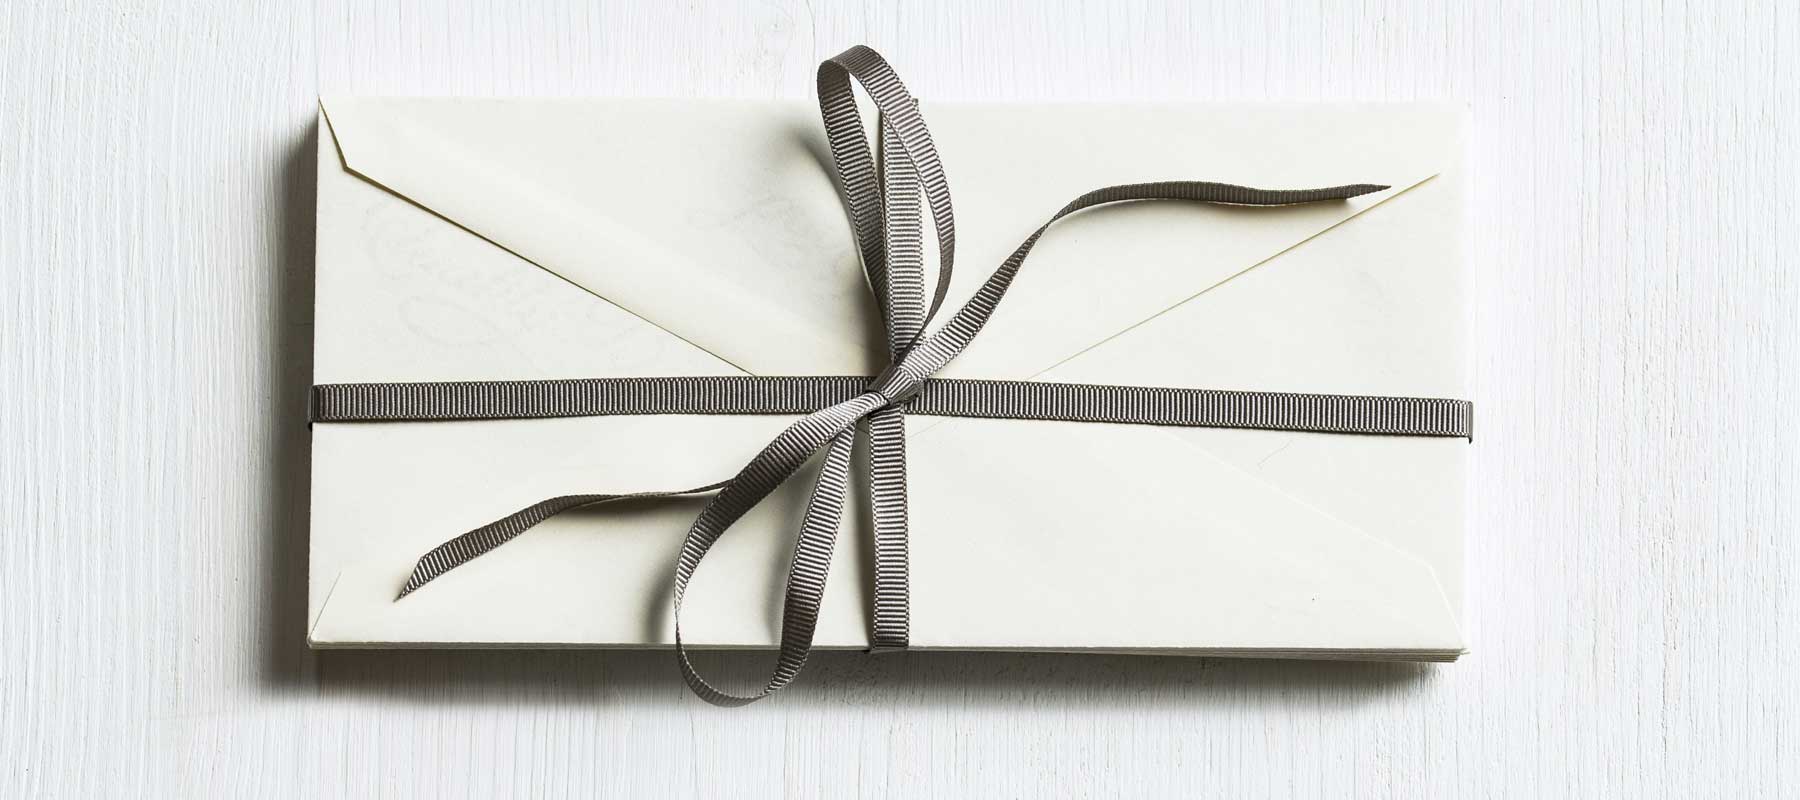 A gift voucher wrapped as a beautiful gift